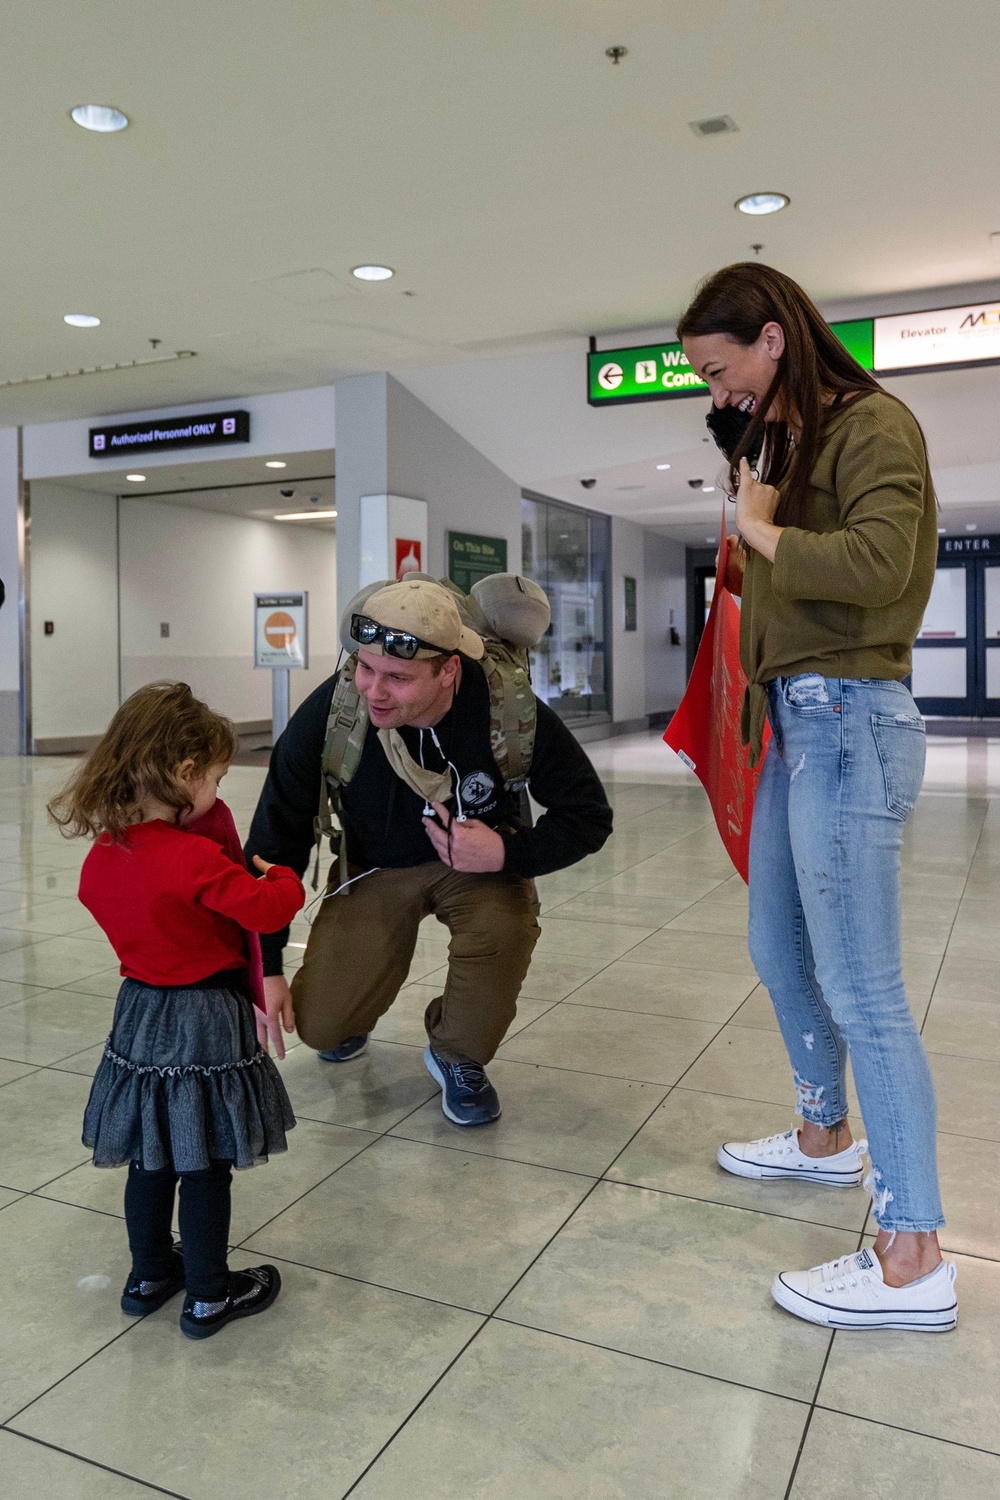 58th EMIB returns home from deployment